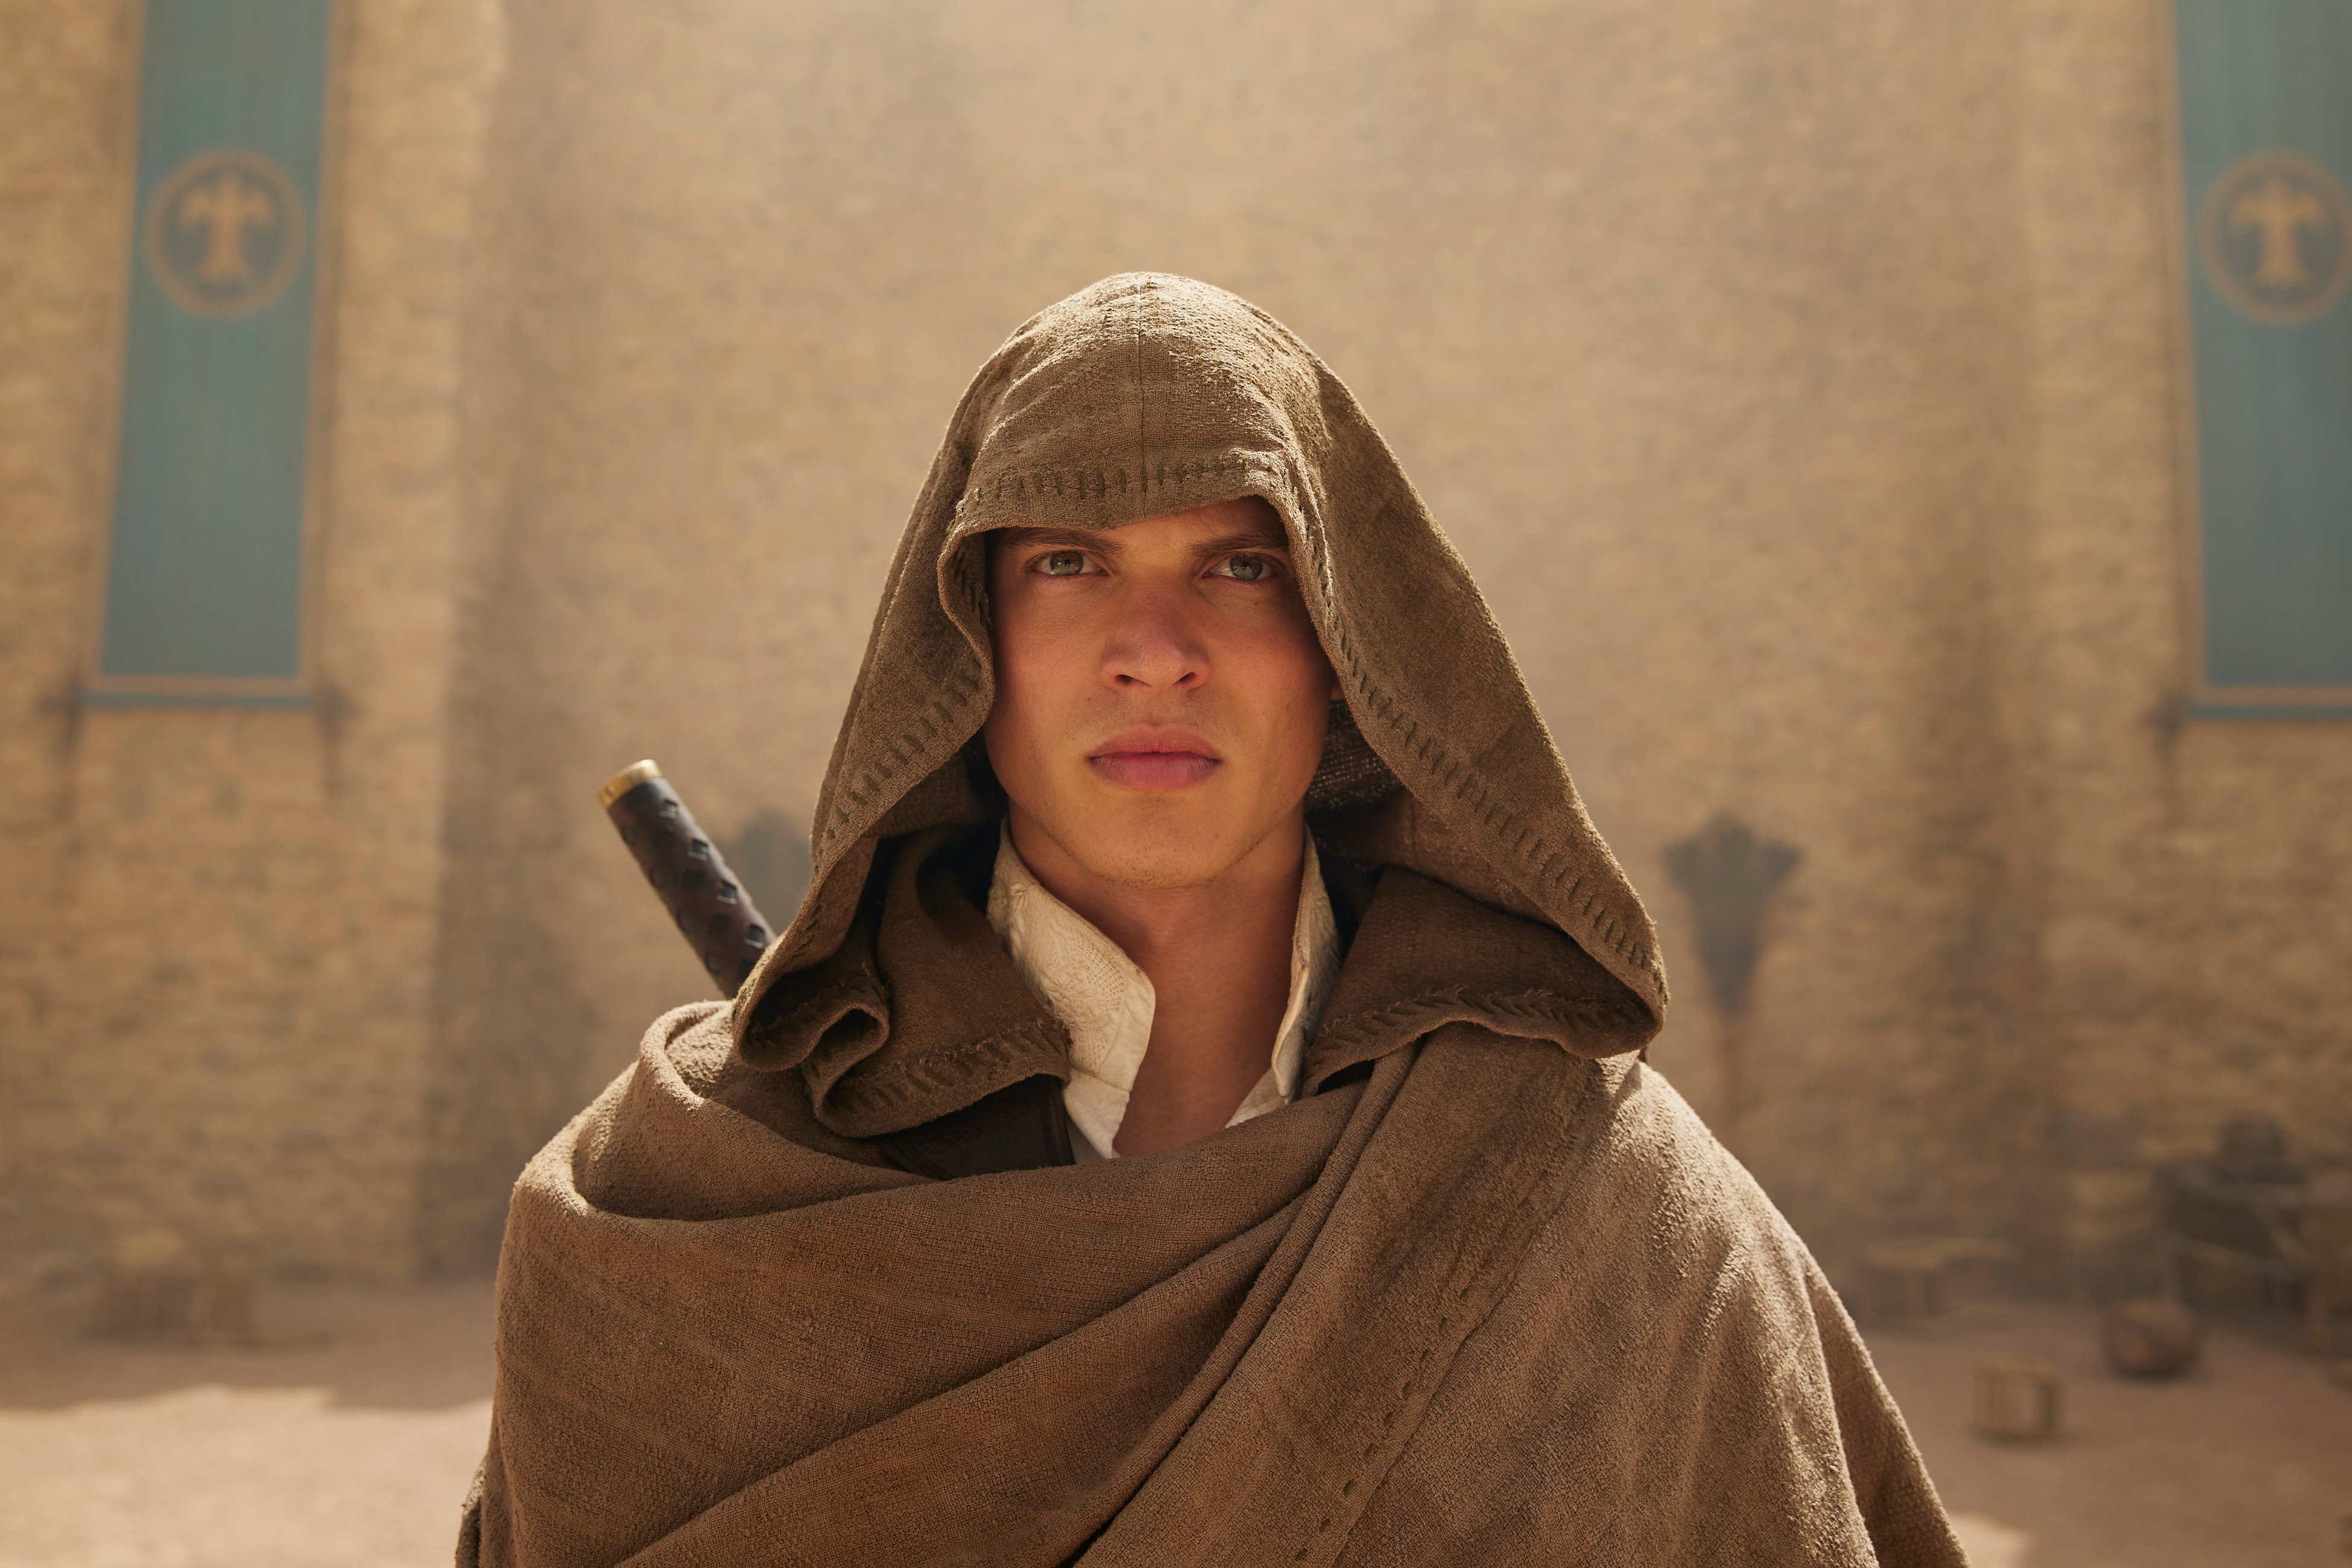 Medium close up of Rand. A brown woven cloak is draped around his head and body.